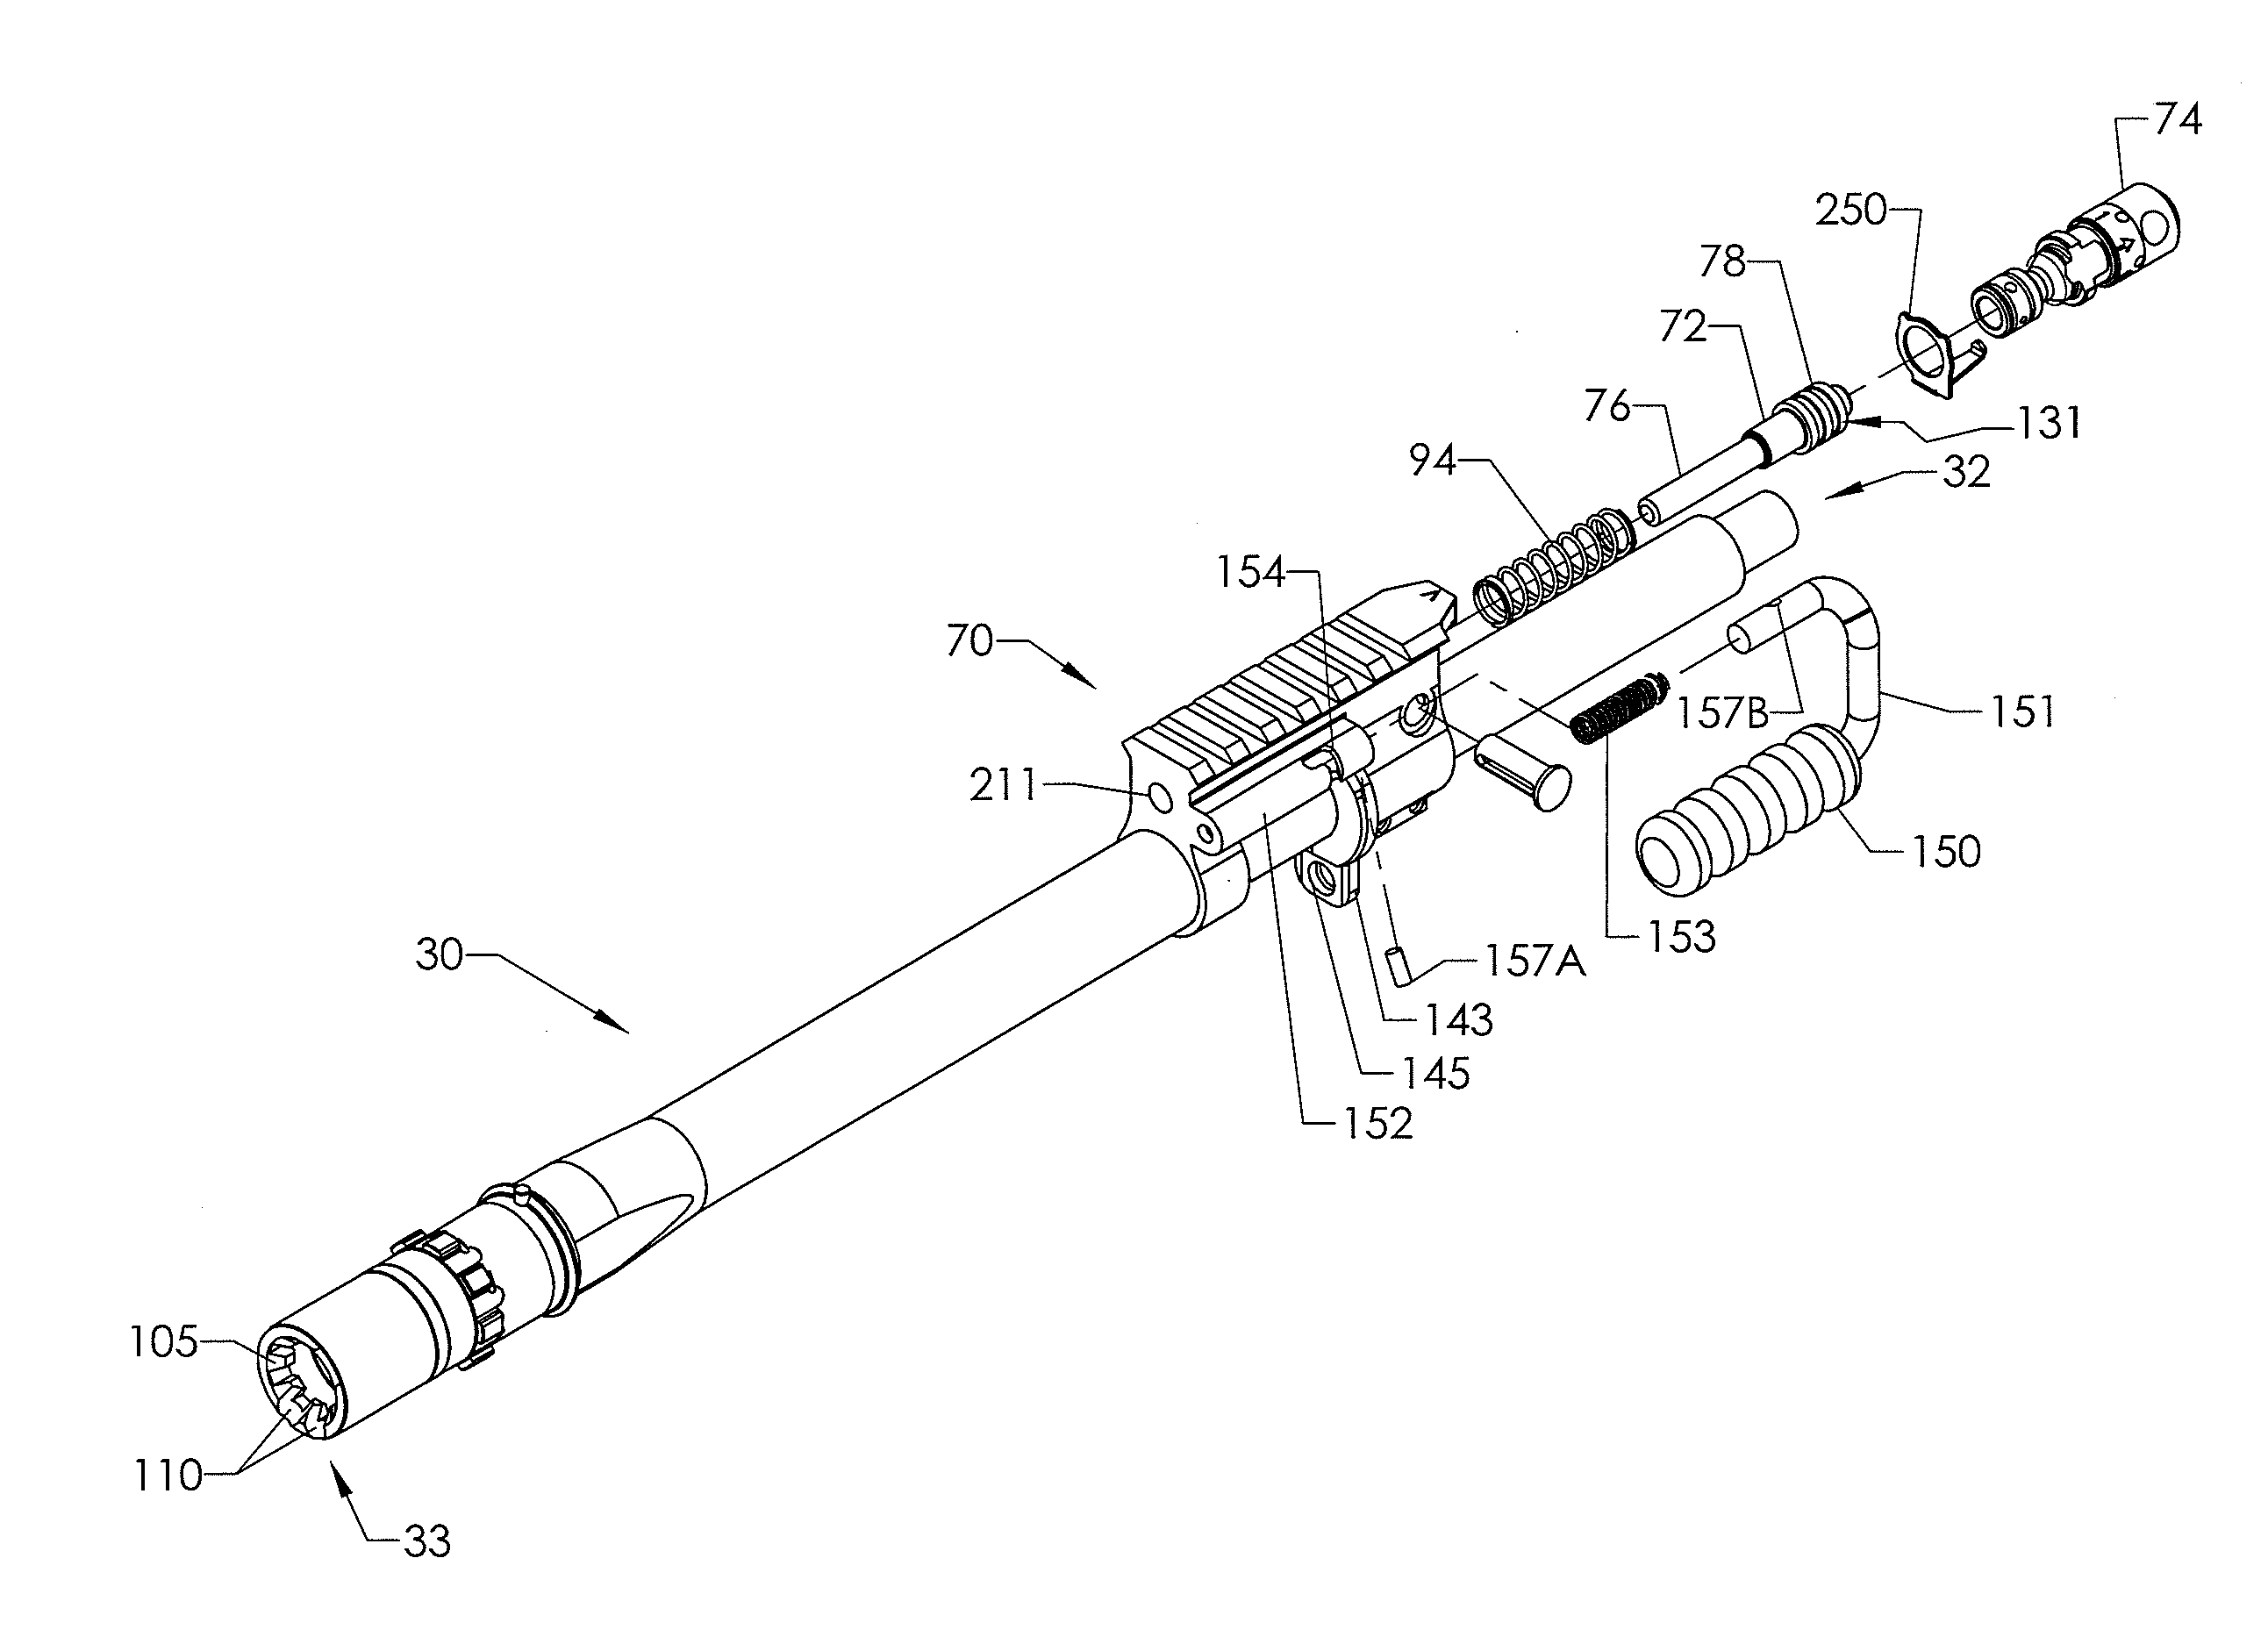 Bolt carrier for gas operated rifle